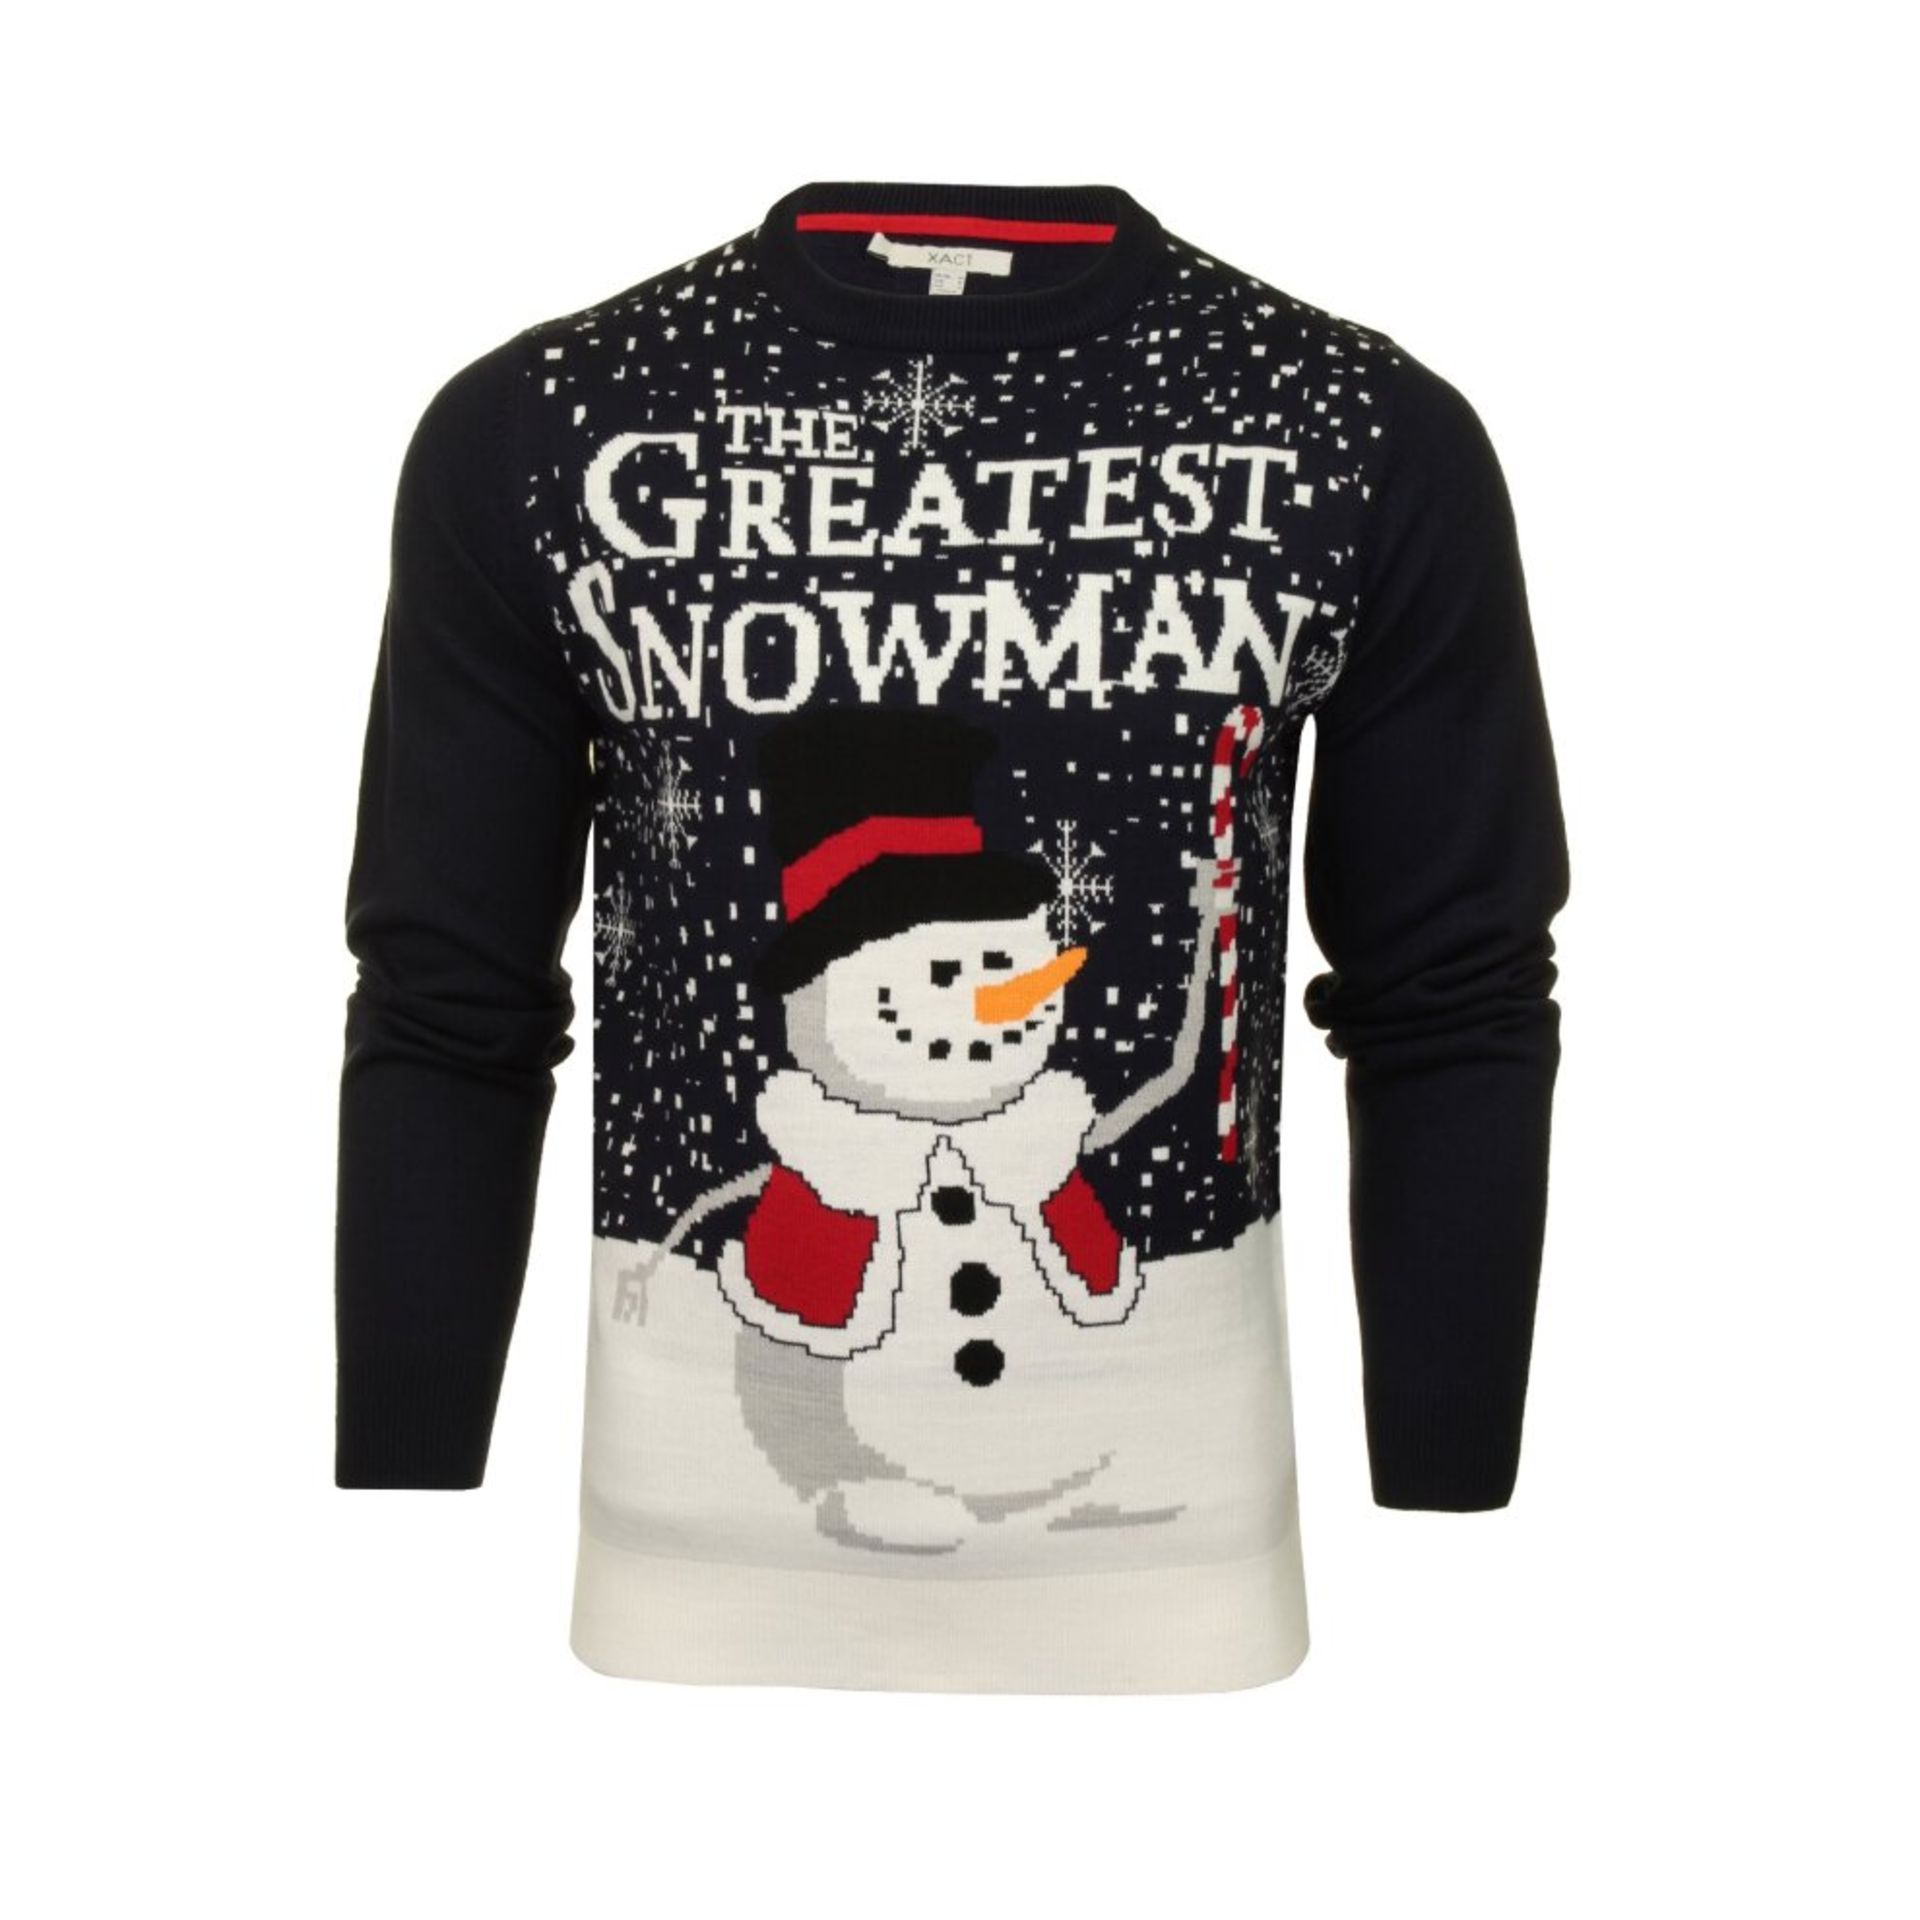 32 X BRAND NEW NOVELTY FESTIVE JUMPERS IE. THE GREATEST SNOWMAN (L-10), NAUGHTY SANTA GREY (S-8),